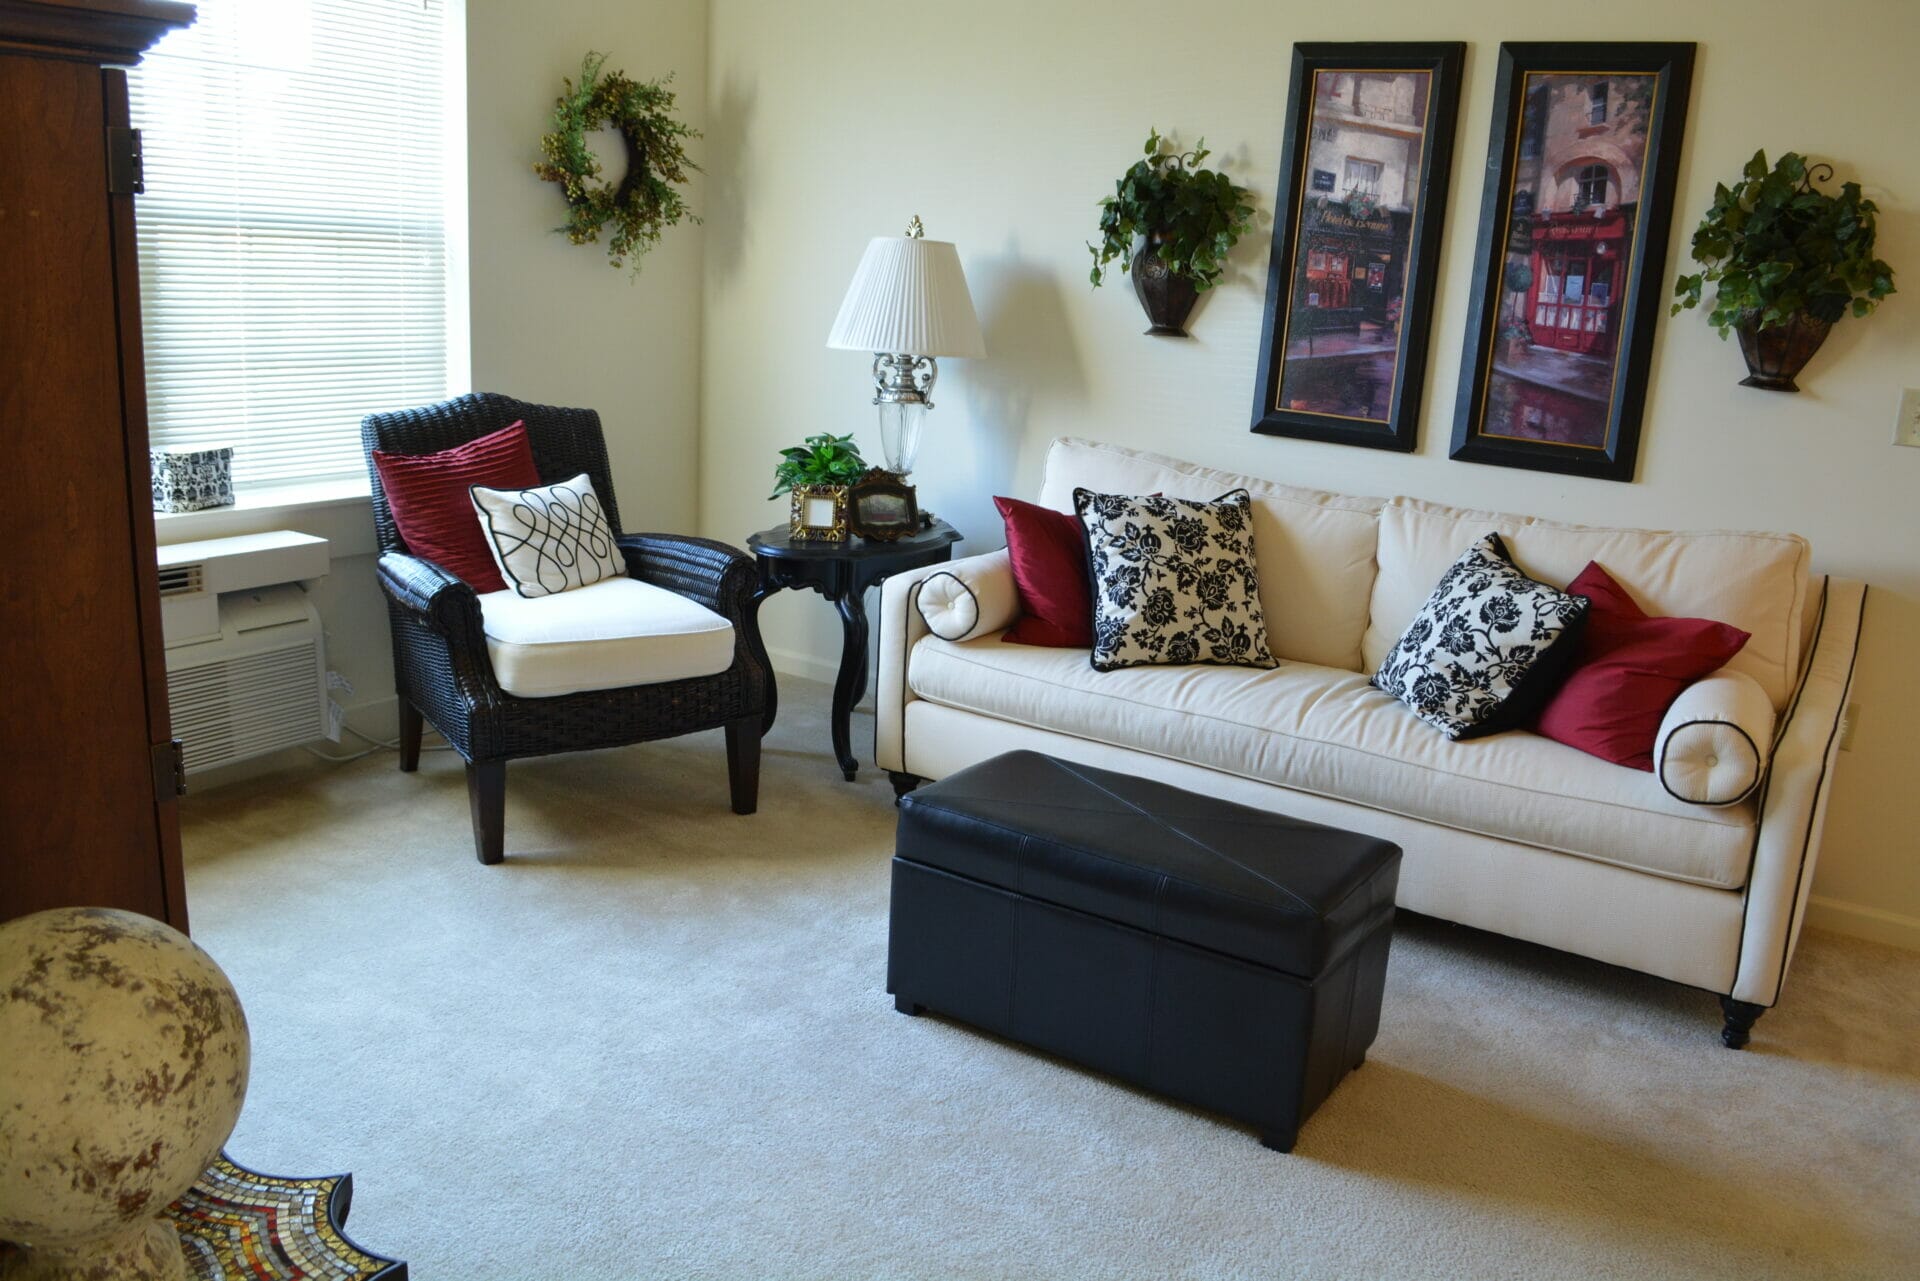 <span  class="uc_style_uc_tiles_grid_image_elementor_uc_items_attribute_title" style="color:#000000;">Allisonville Meadows Assisted Living living room.</span>